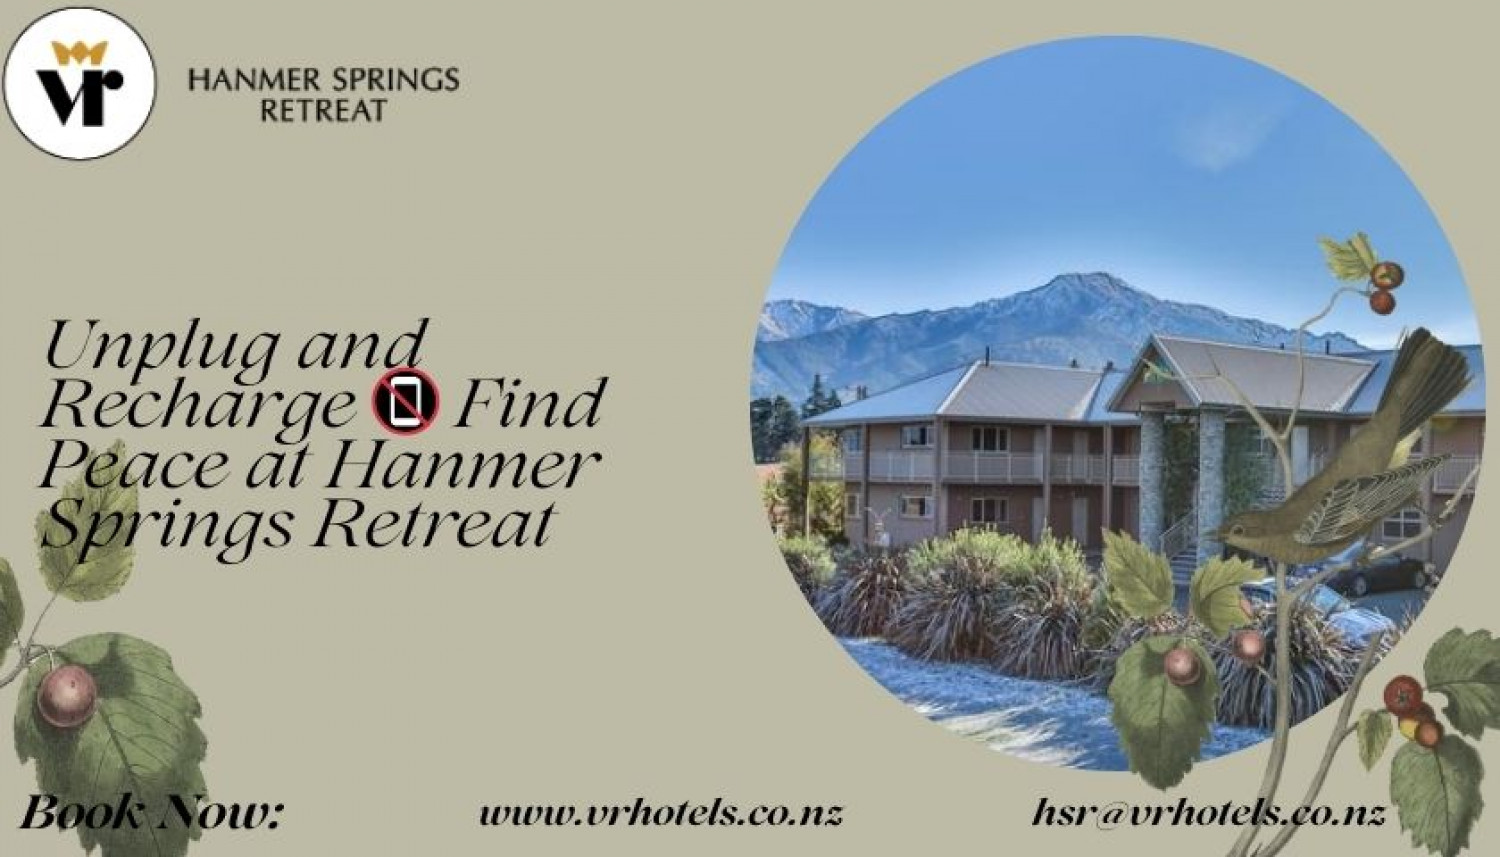 Unplug and Recharge find Peace at Hanmer Springs Retreat Infographic